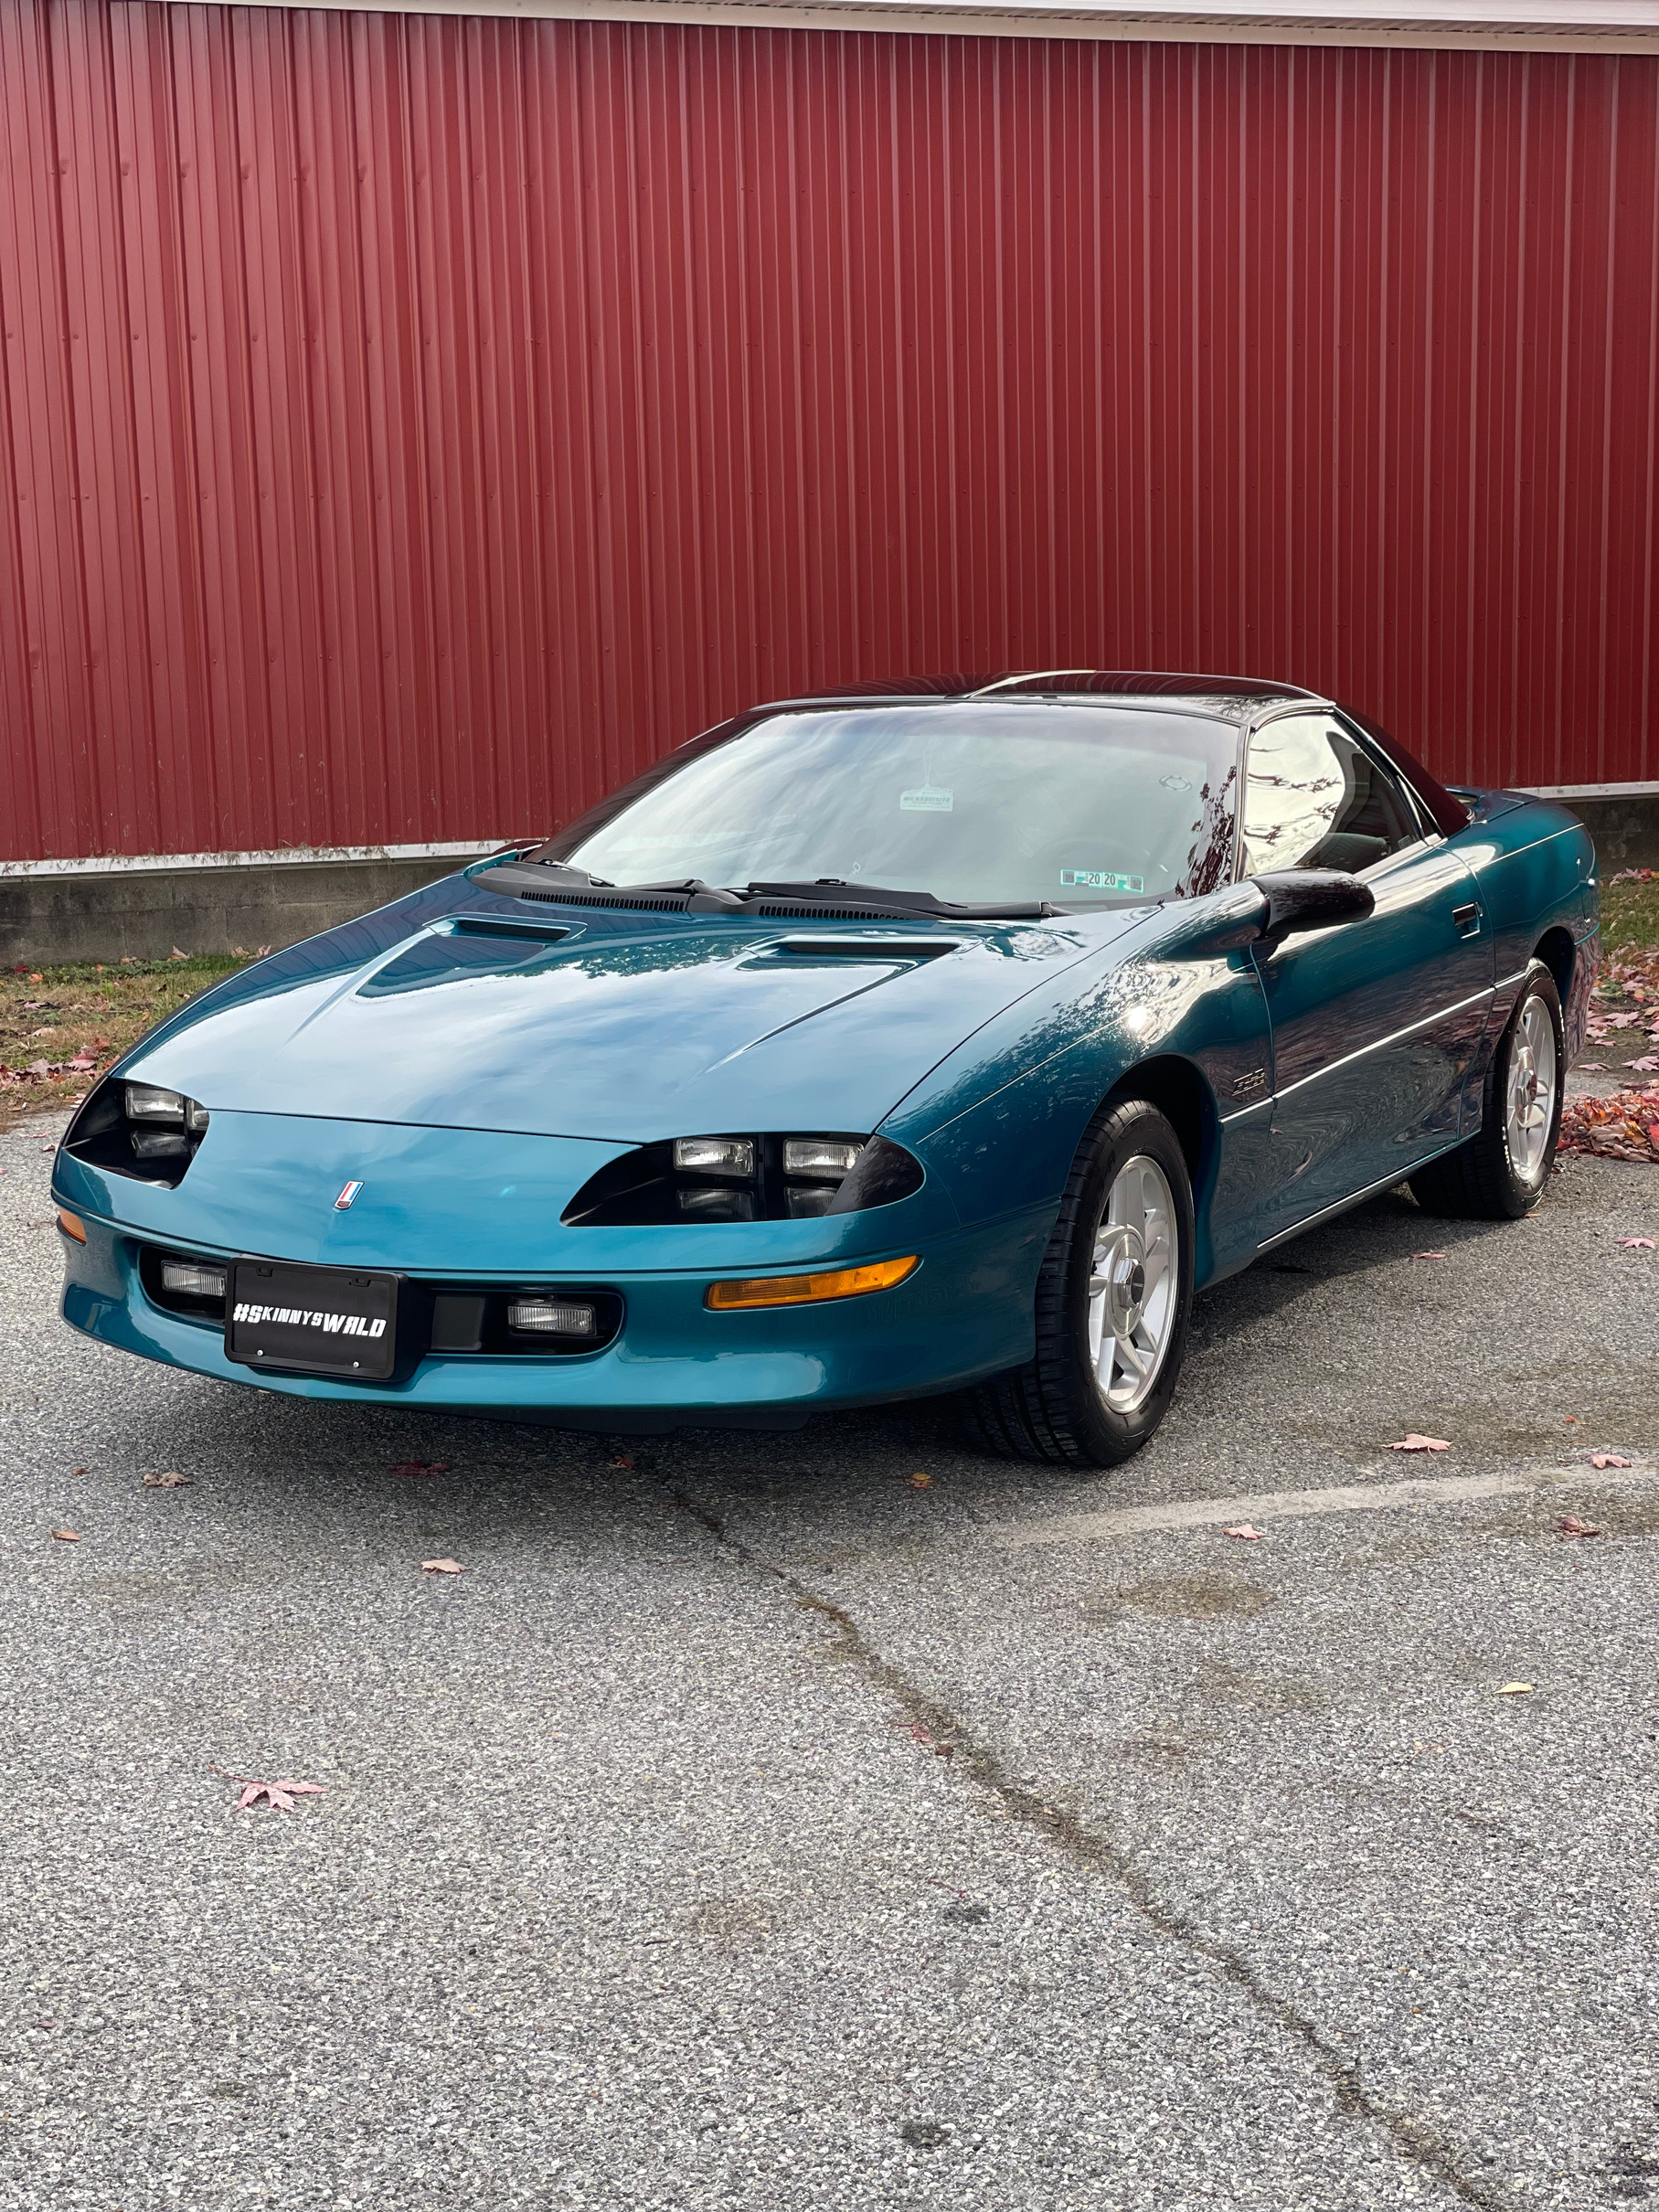 This 1994 Camaro Z28 received a paint enhancement service.